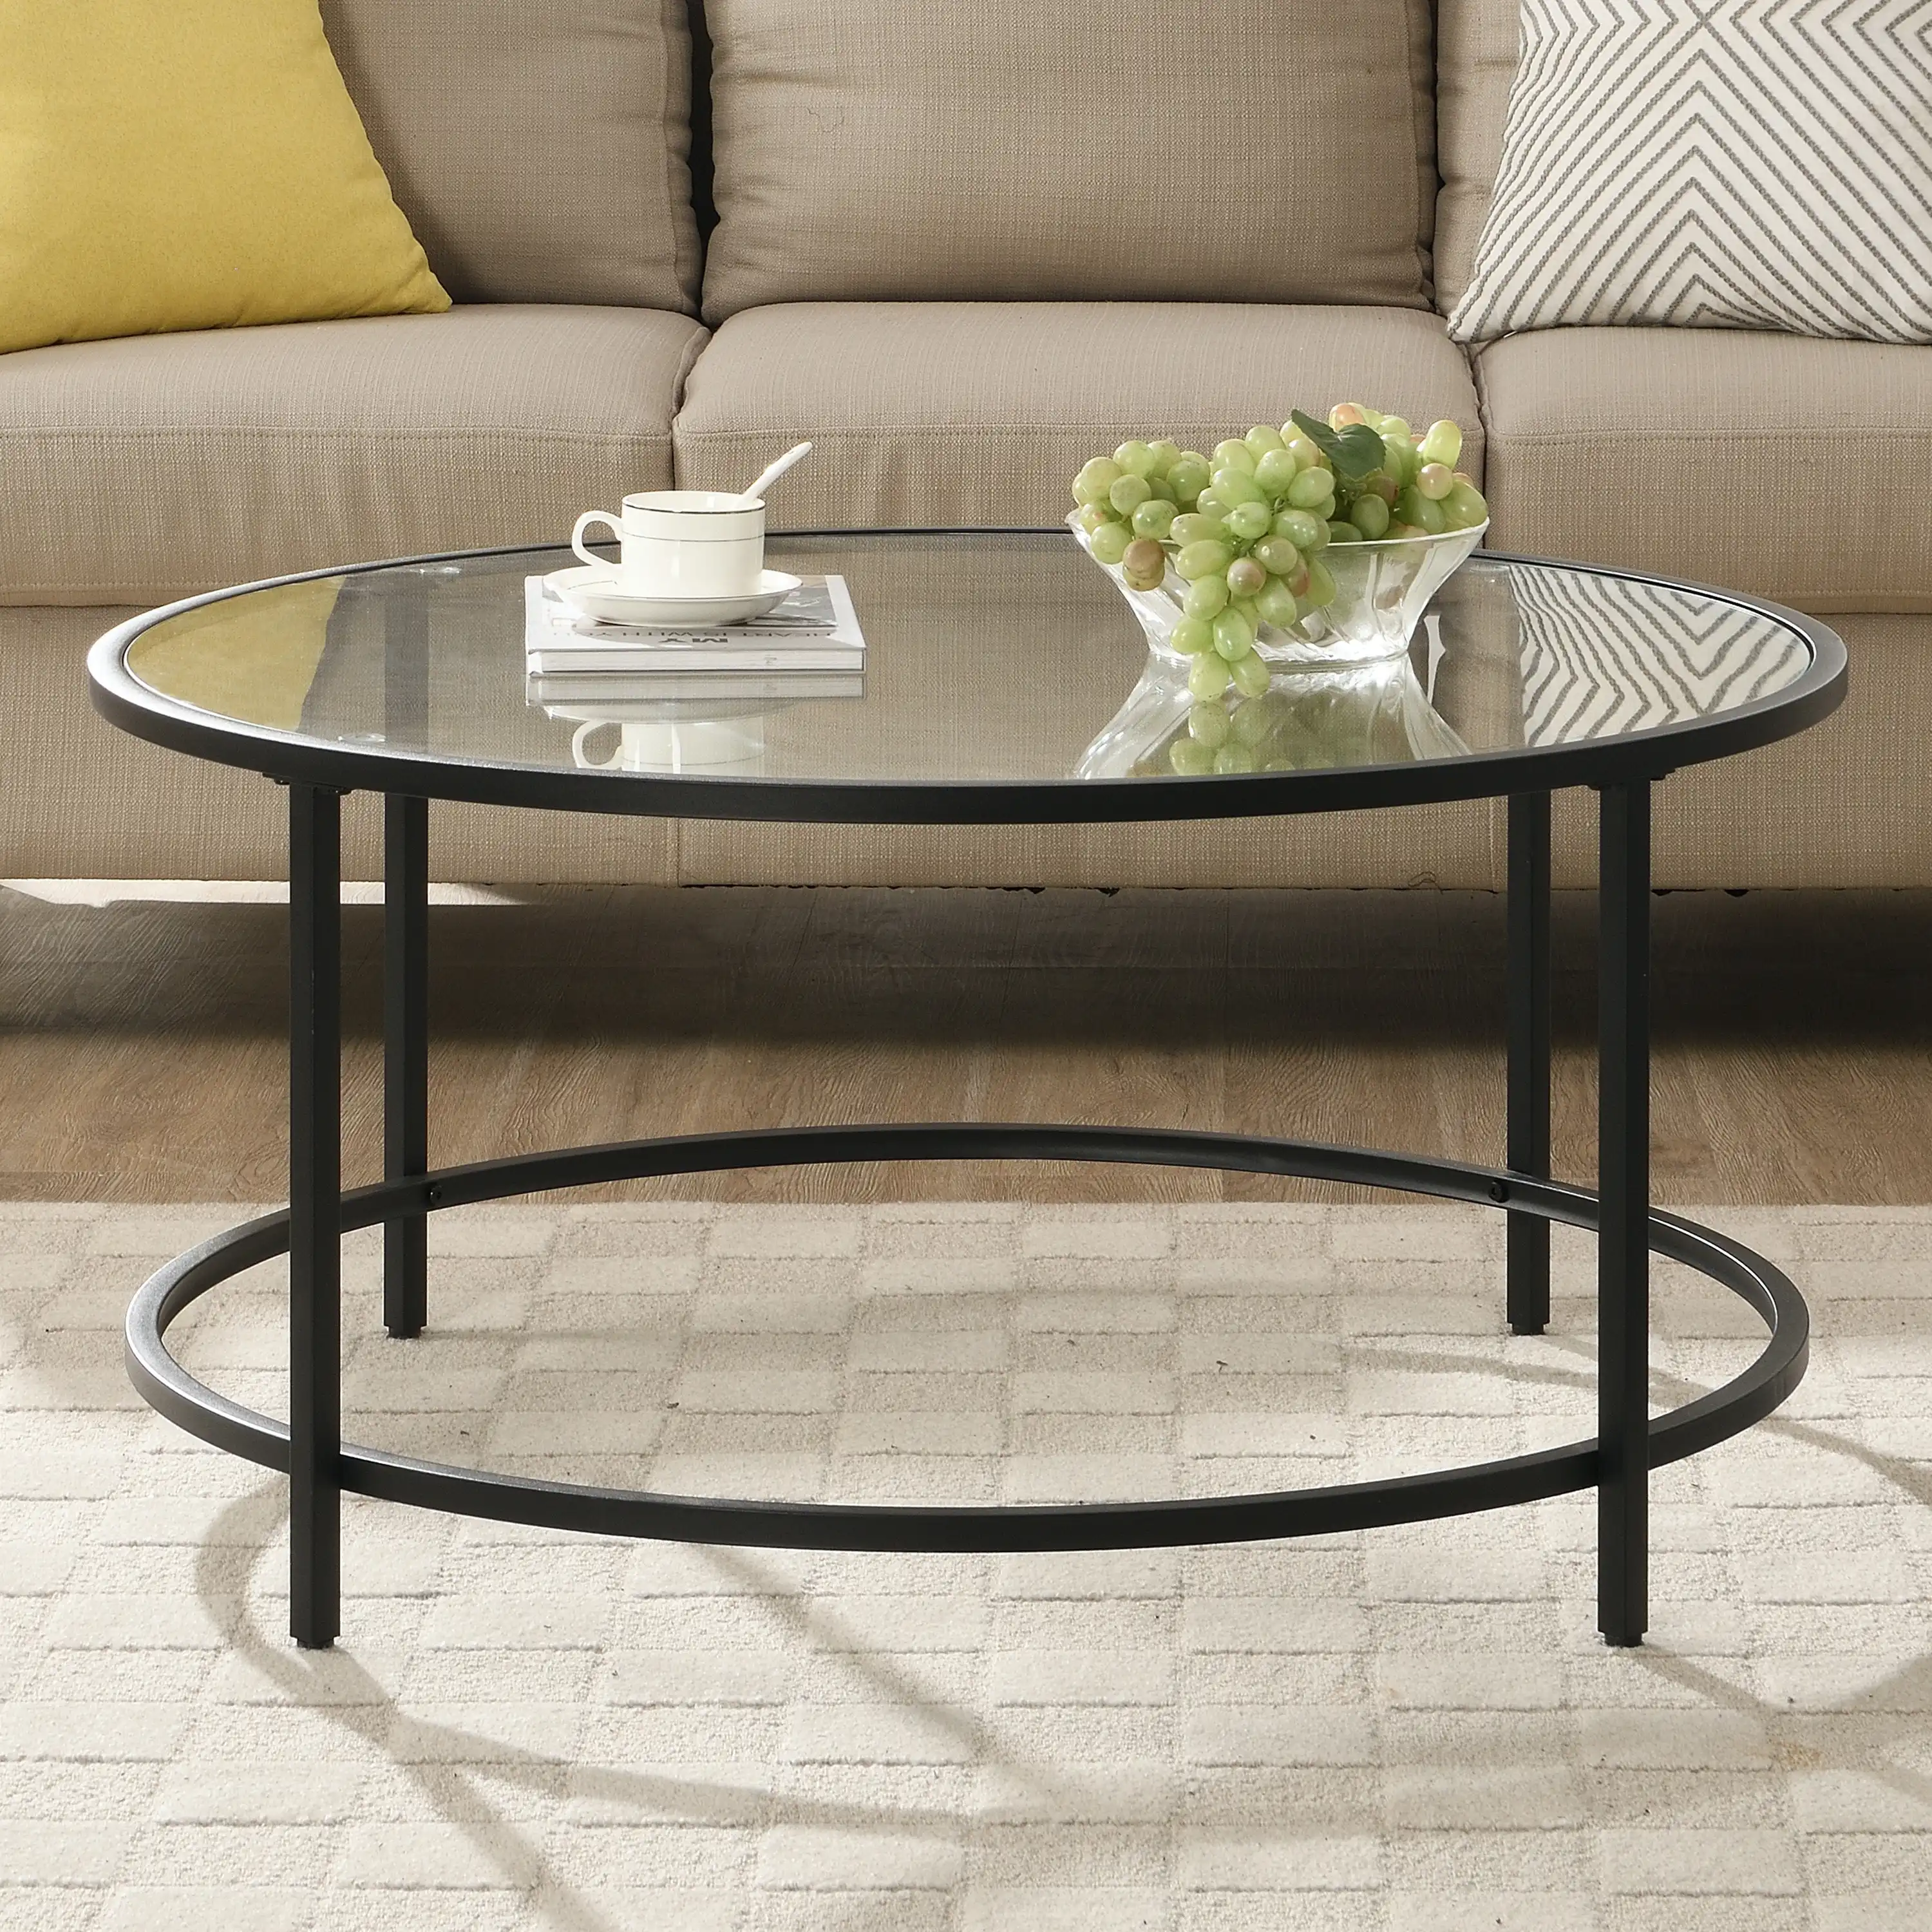 IHOMDEC Round Coffee Tables Metal Frame with Top Tempered Glass Black/Transparent